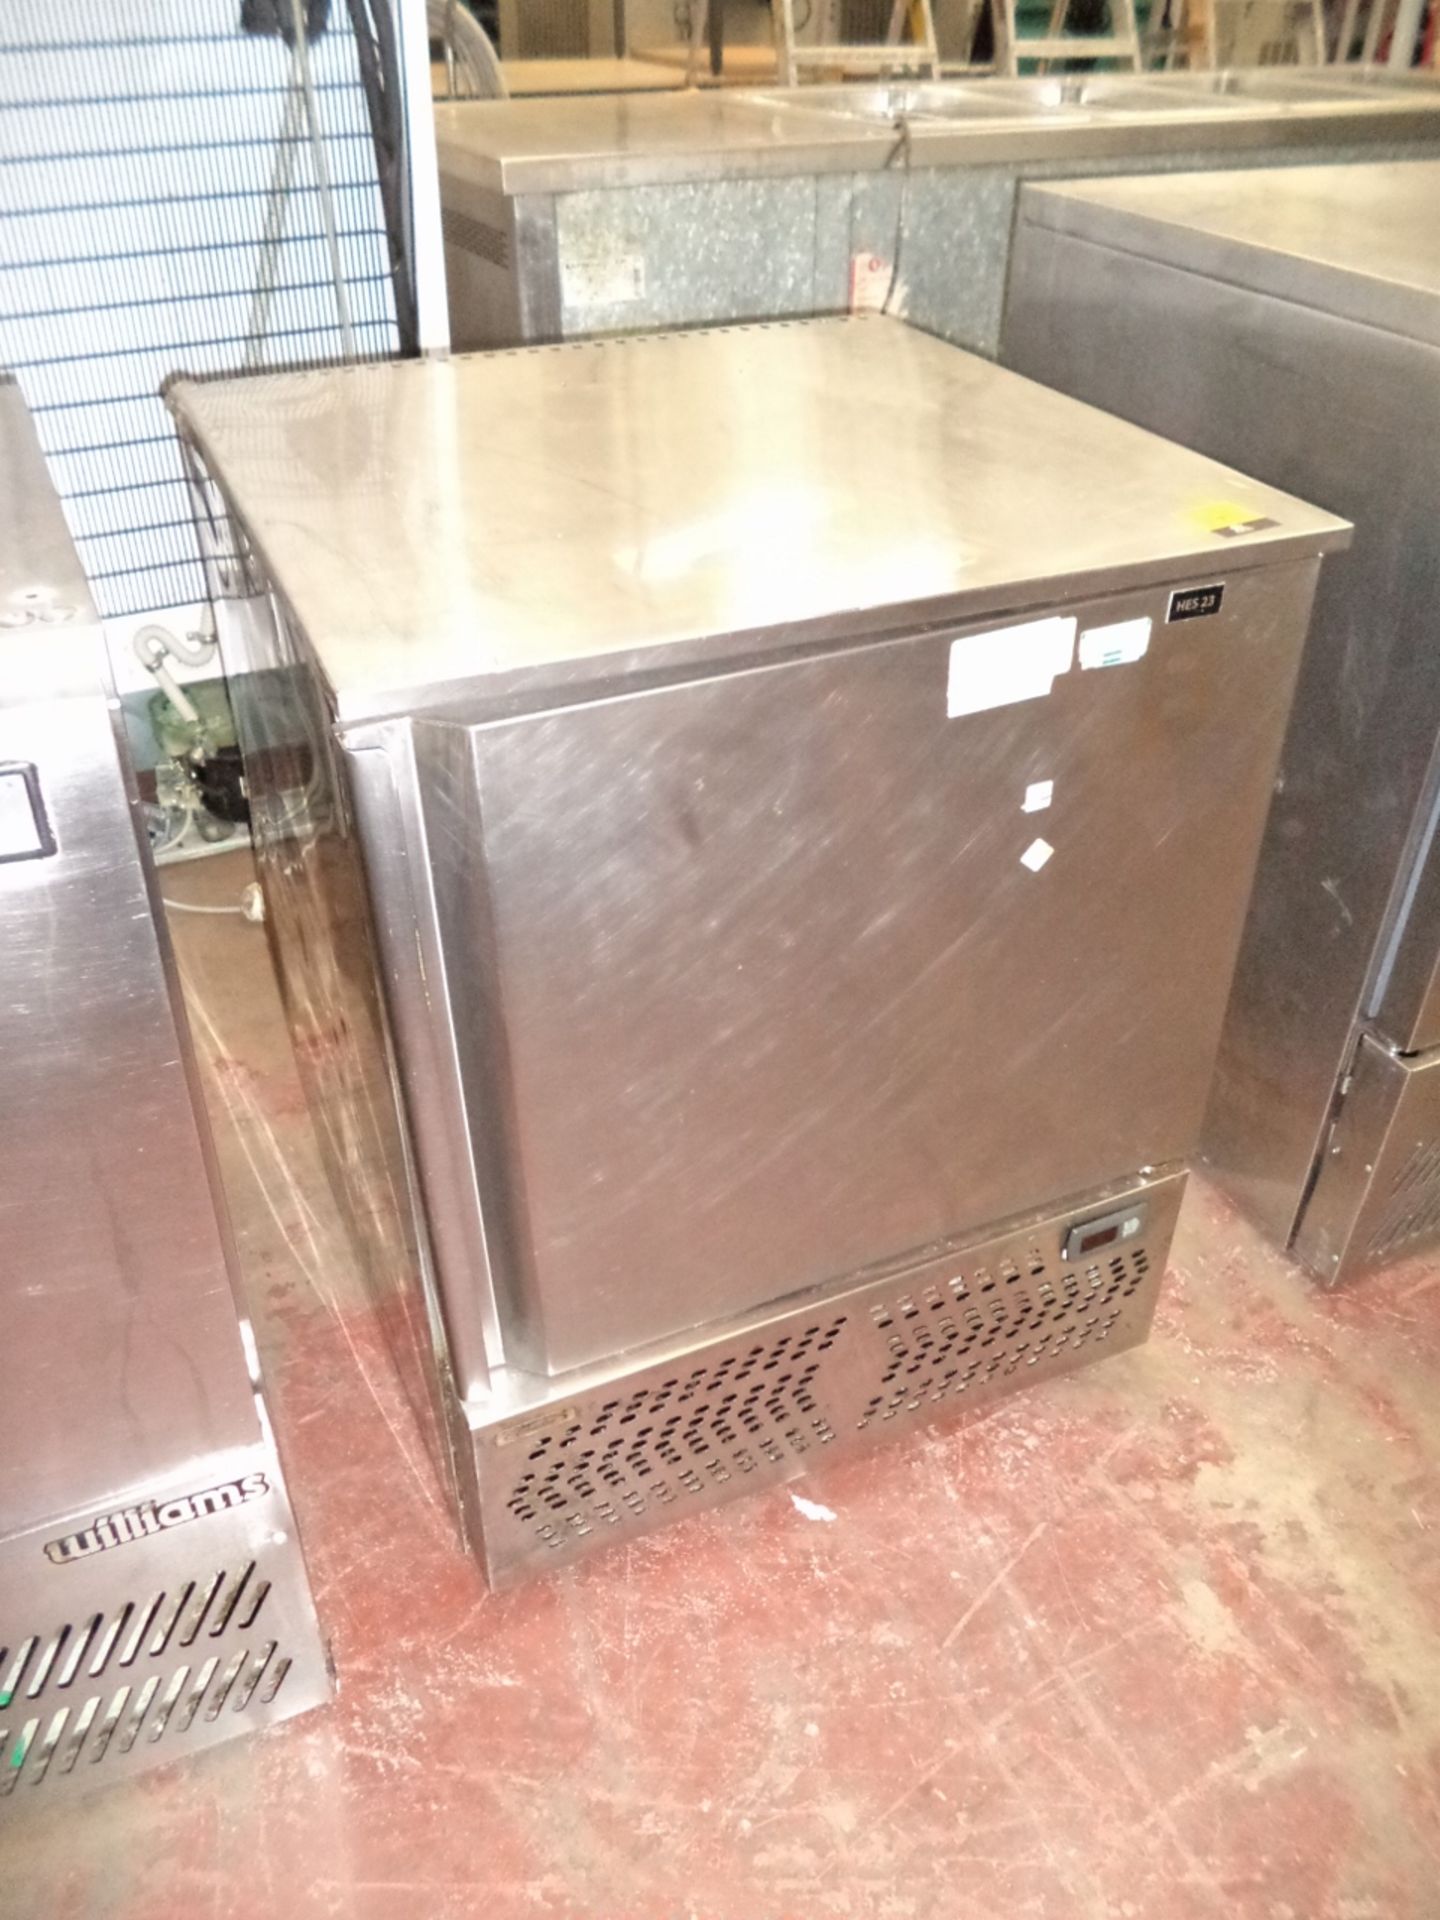 stainless steel counter height freezer.